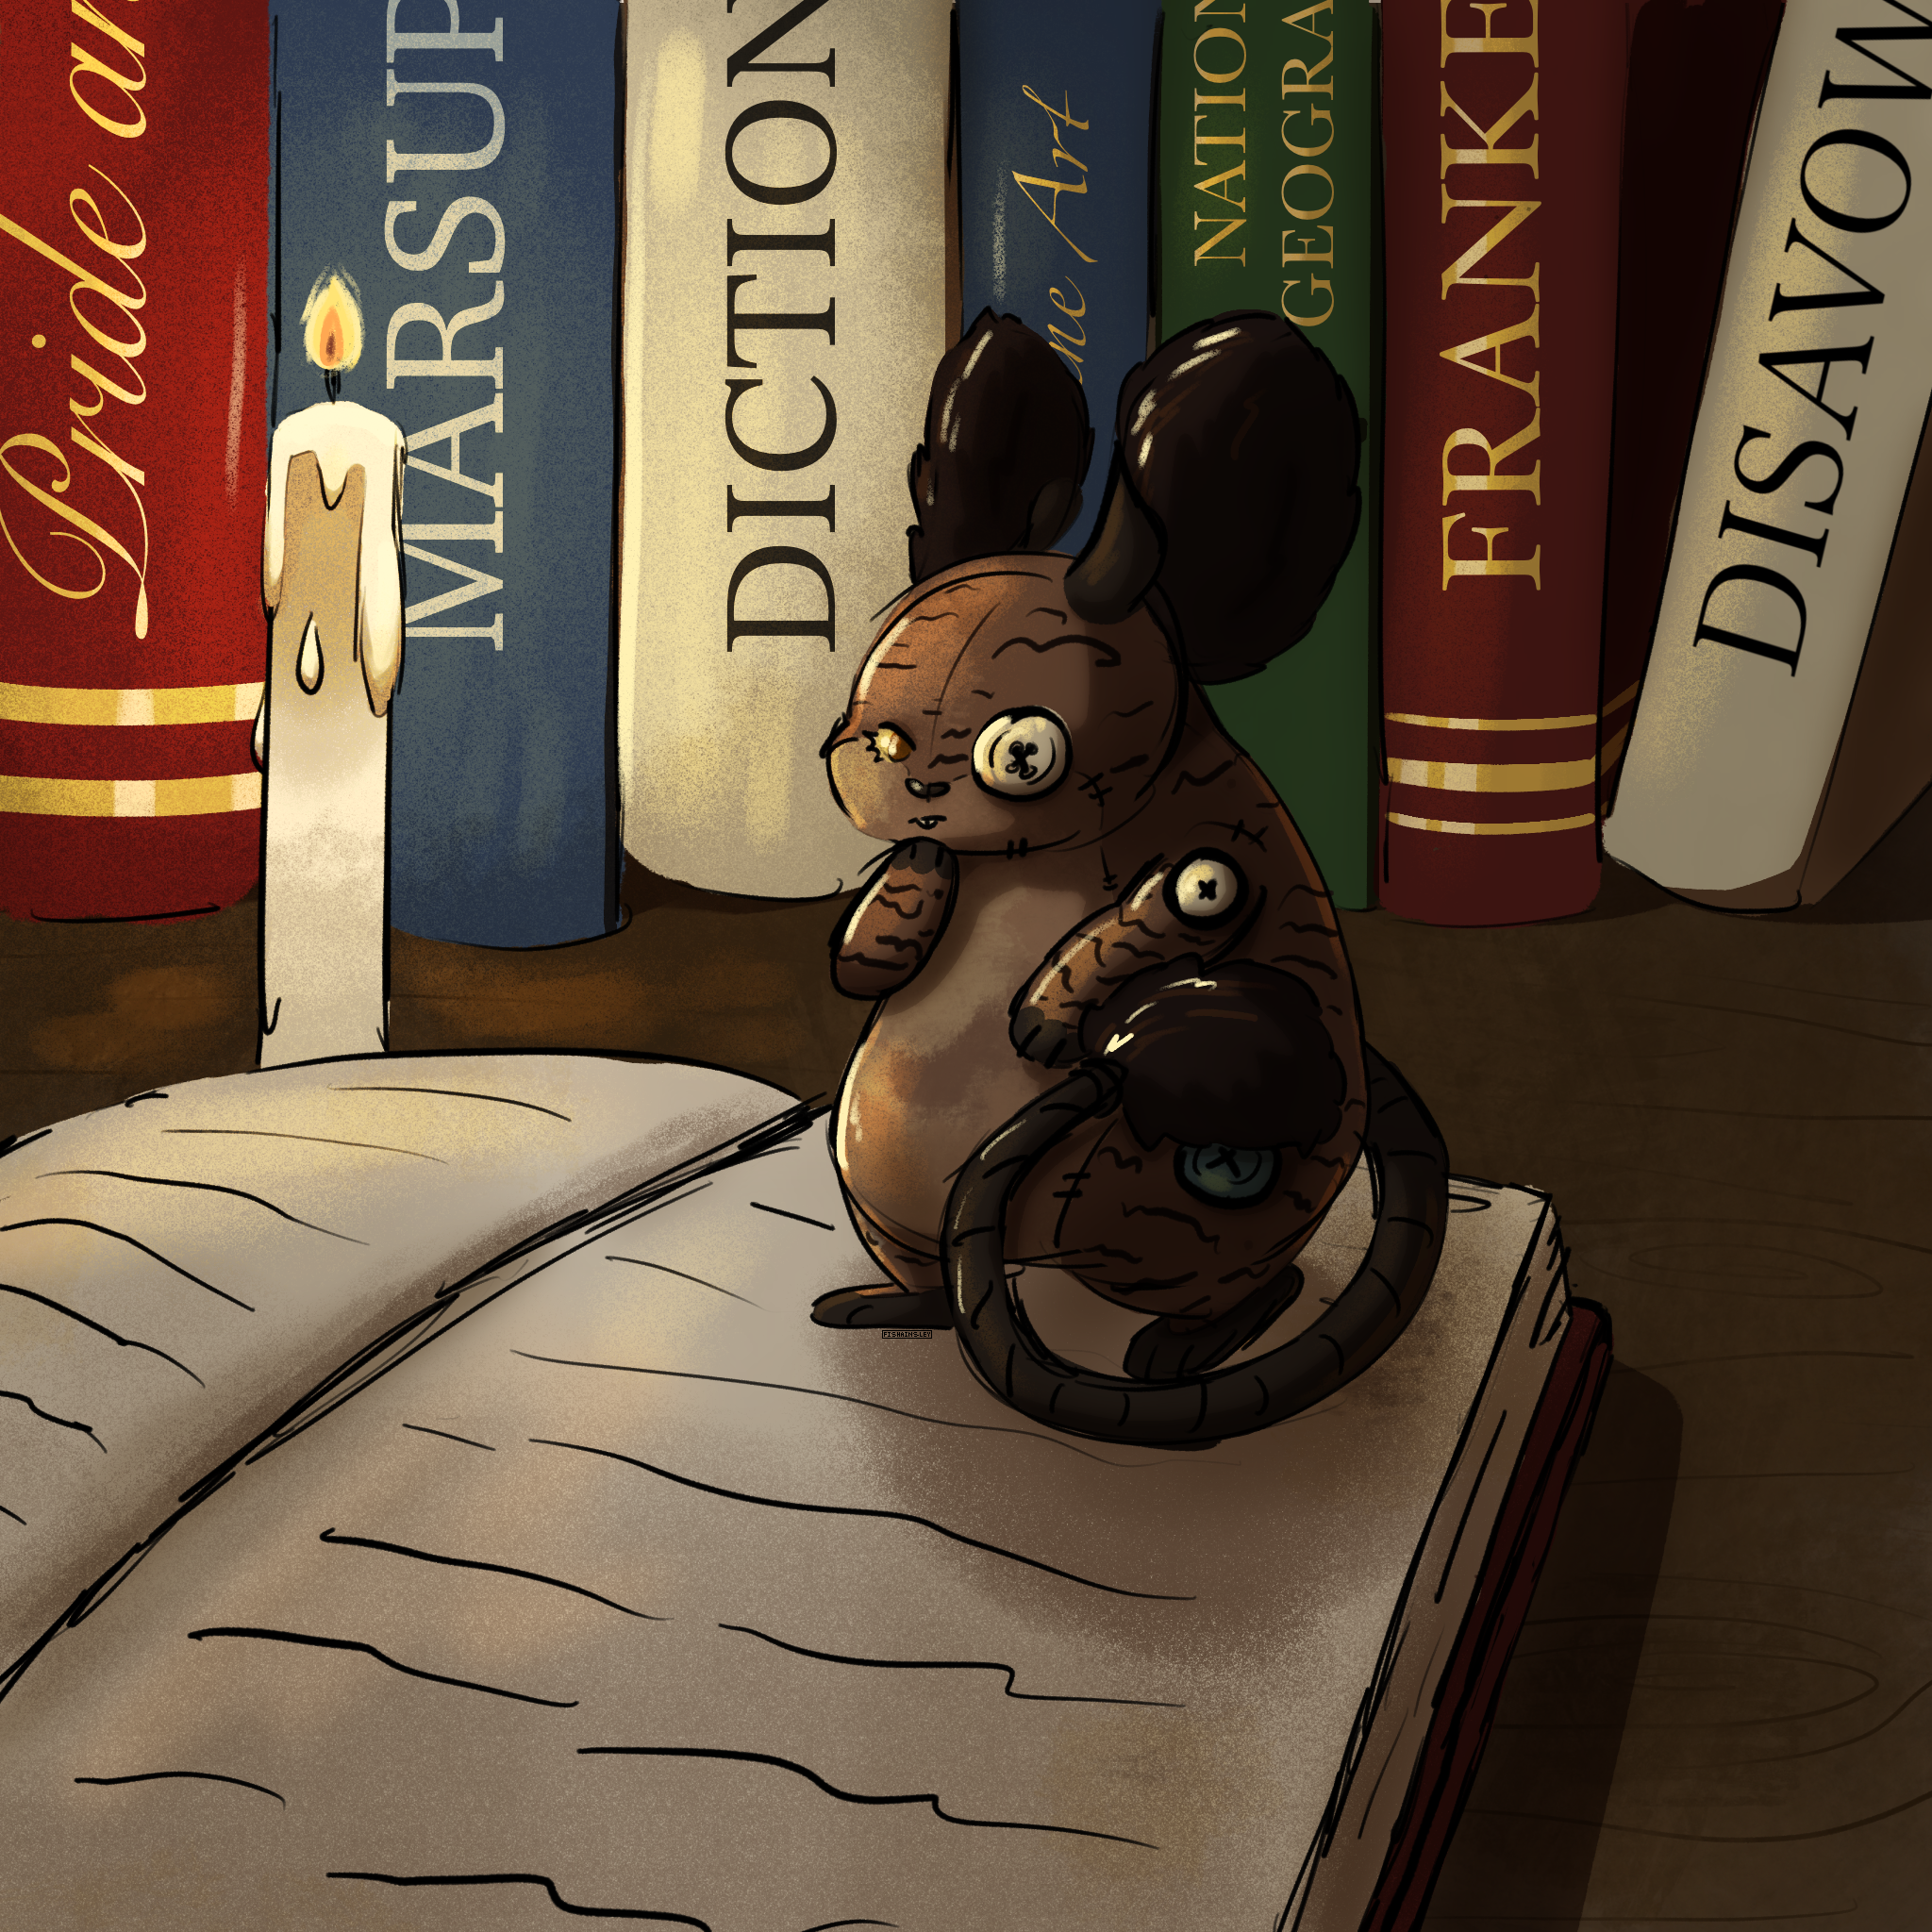 A plush mouse-like creature reading a book by candlelight.